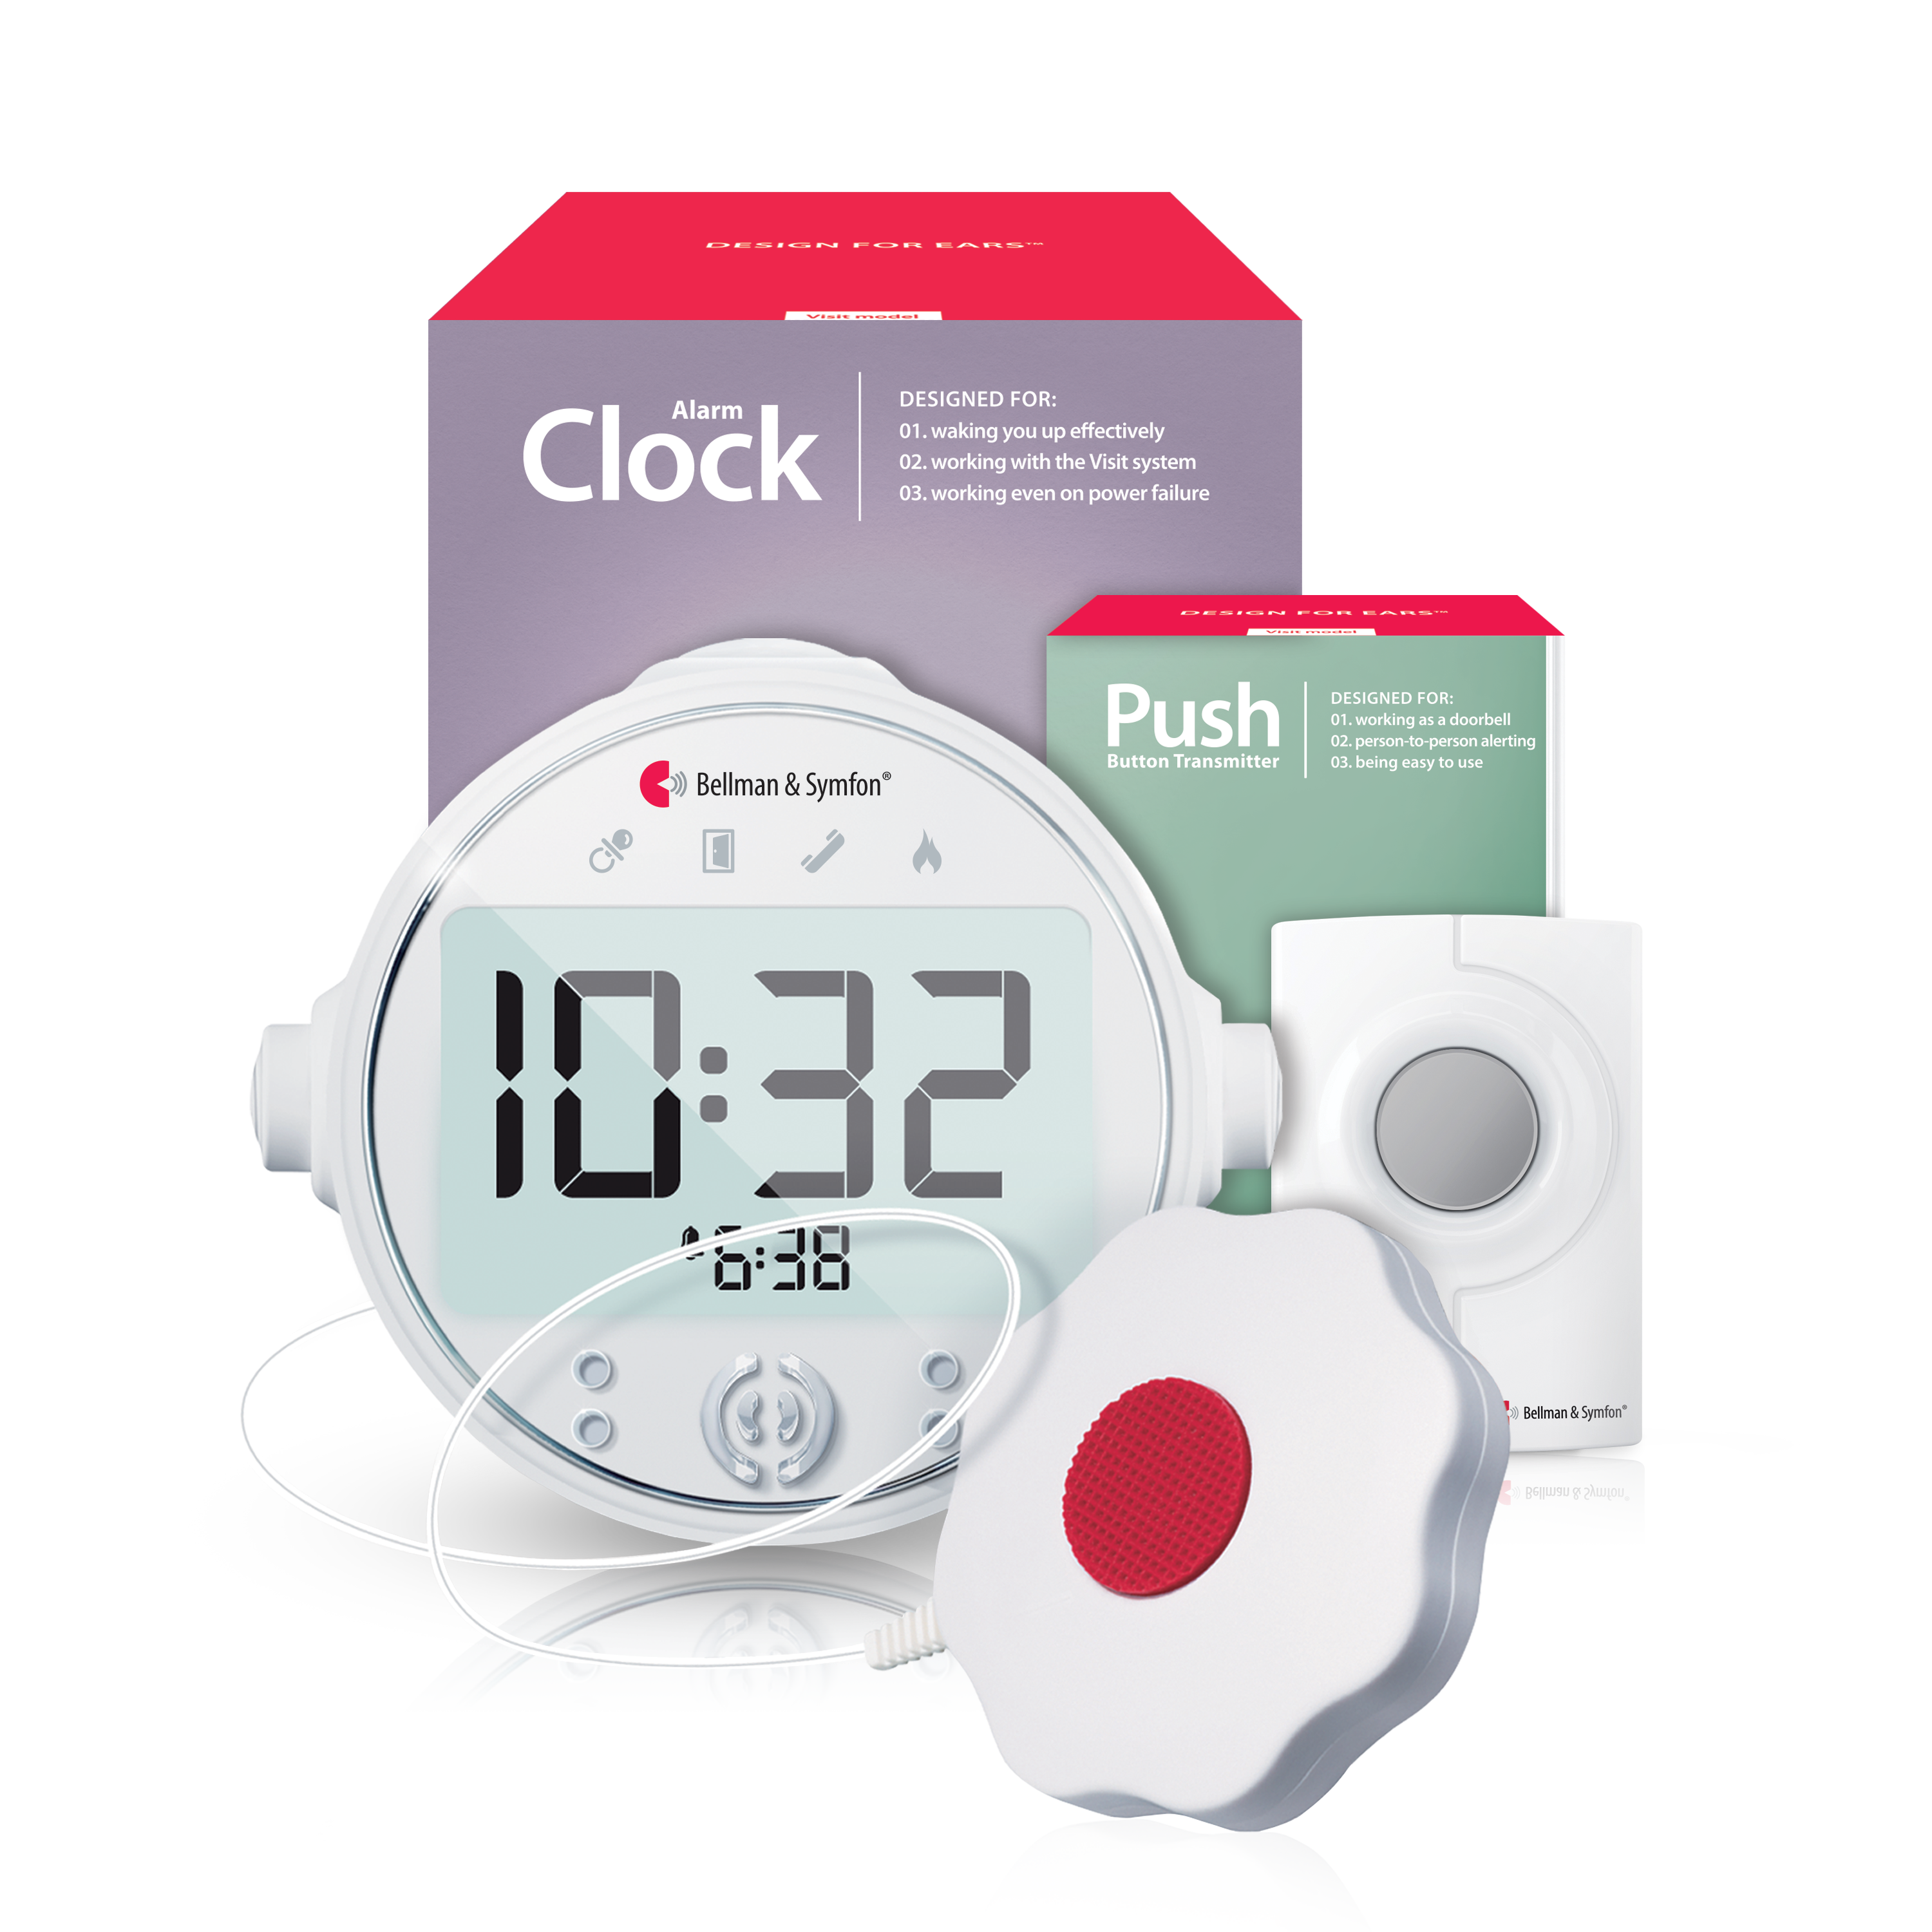 Push Button Notification System | with Alarm Clock Receiver and Bed Shaker